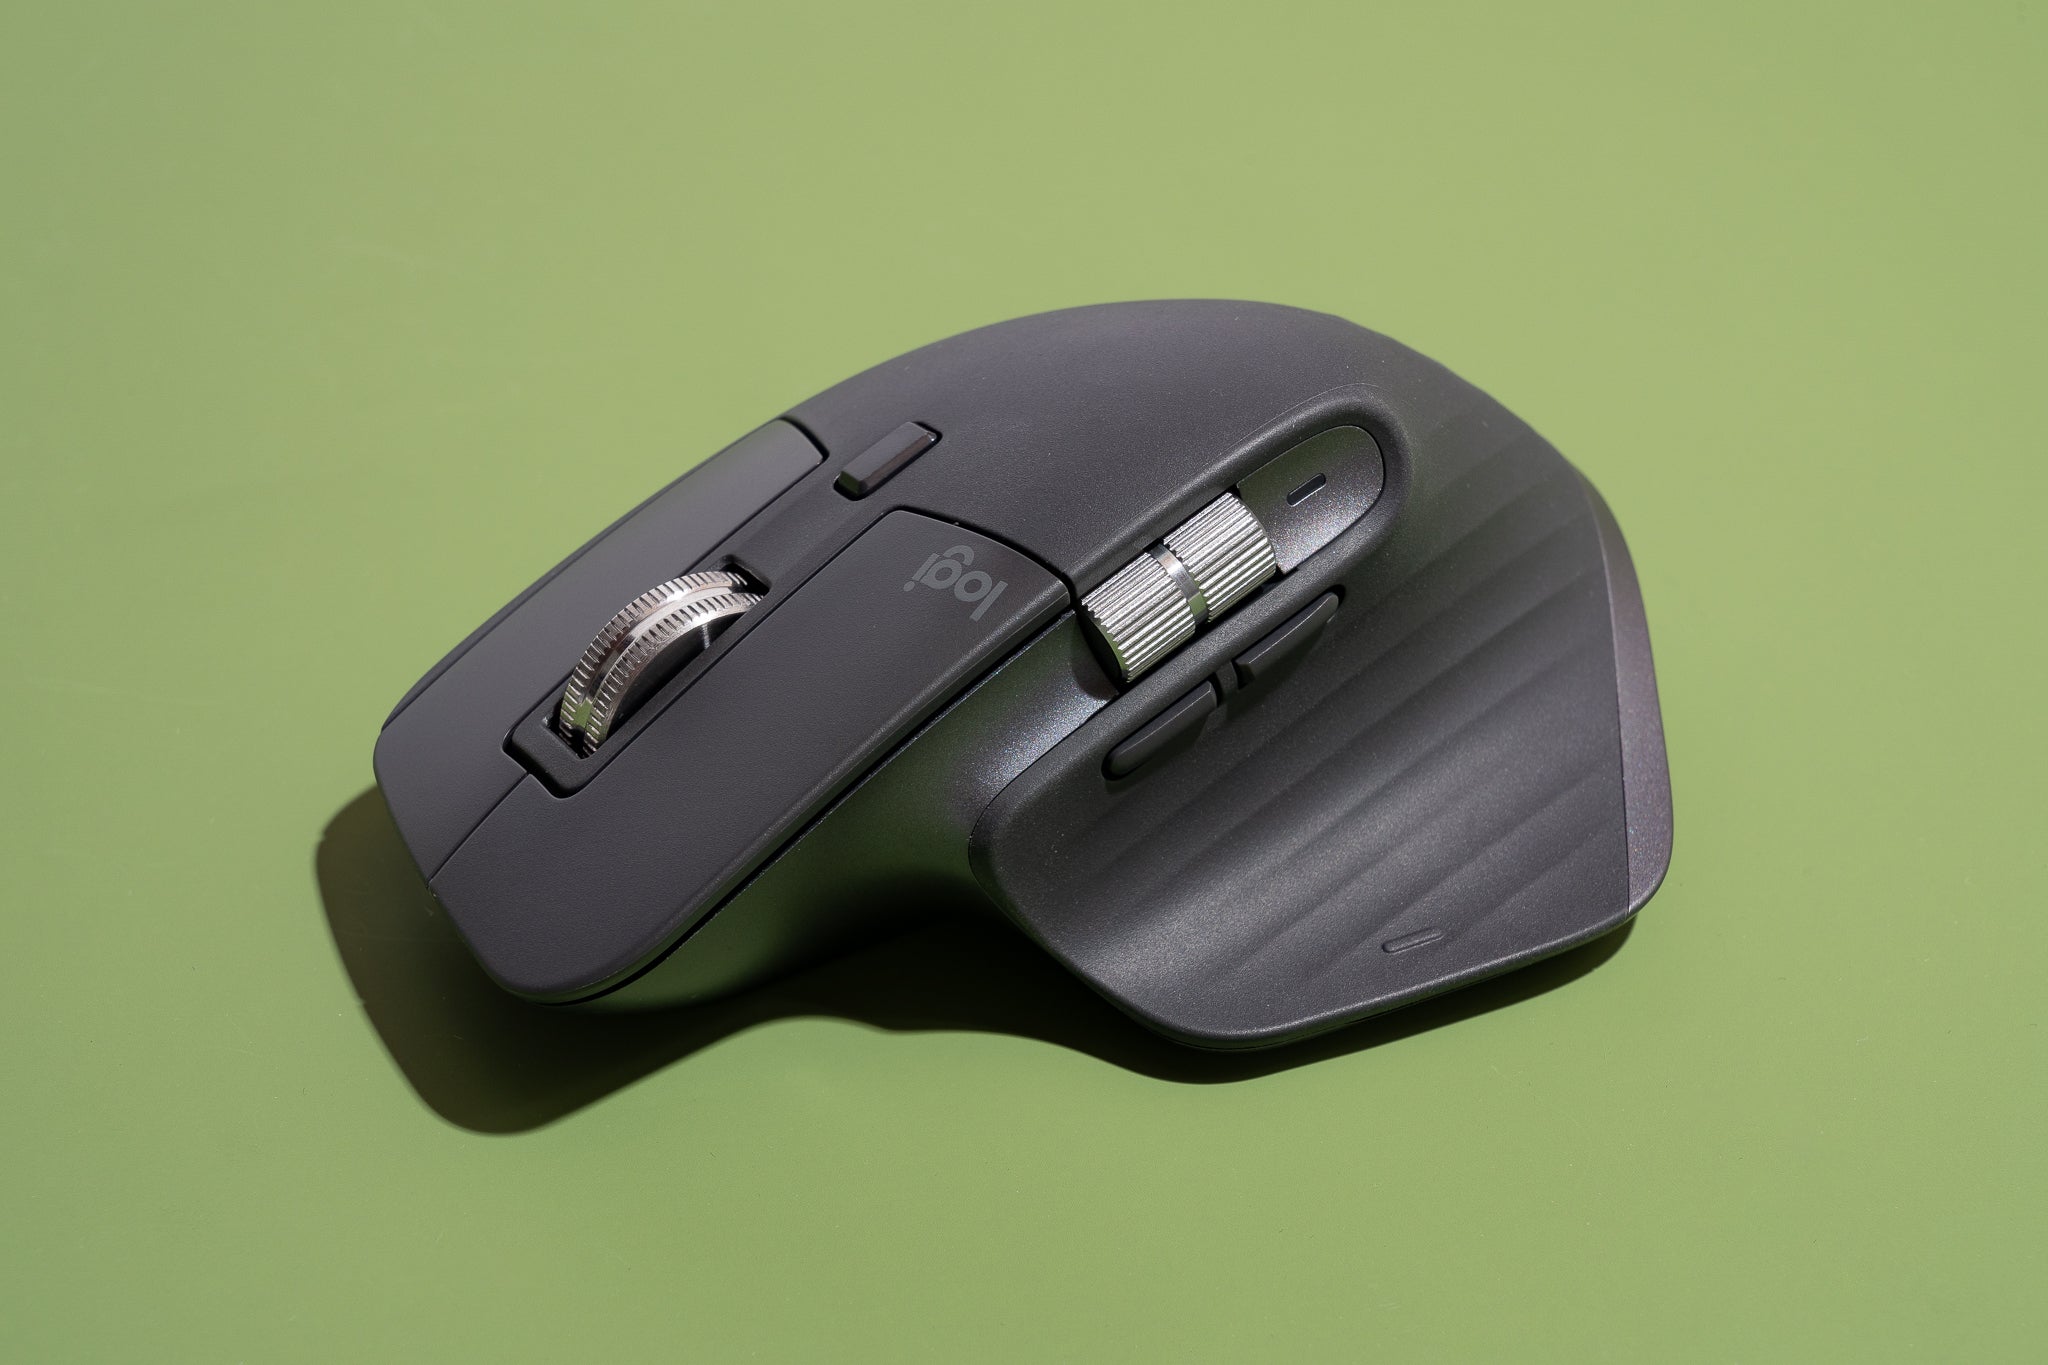 how to use remote mouse on laptop